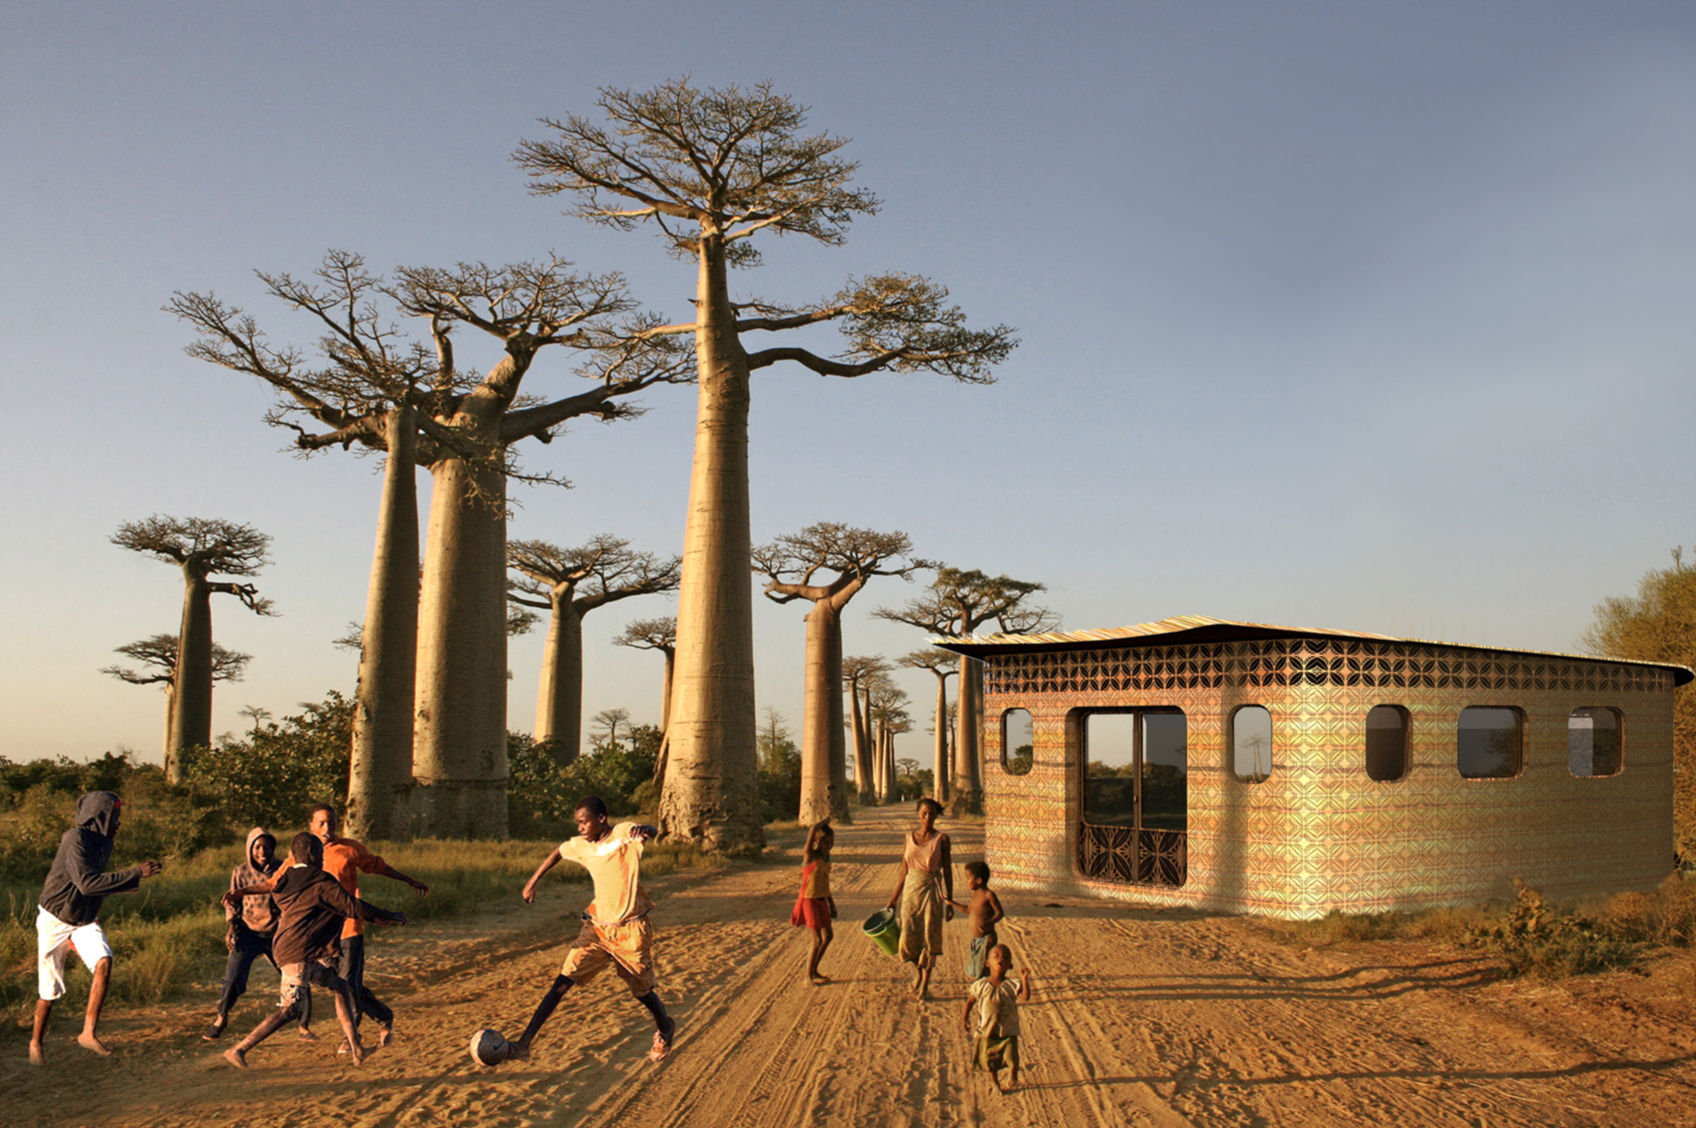 children play soccer in front of a school in the sand with trees in the distance